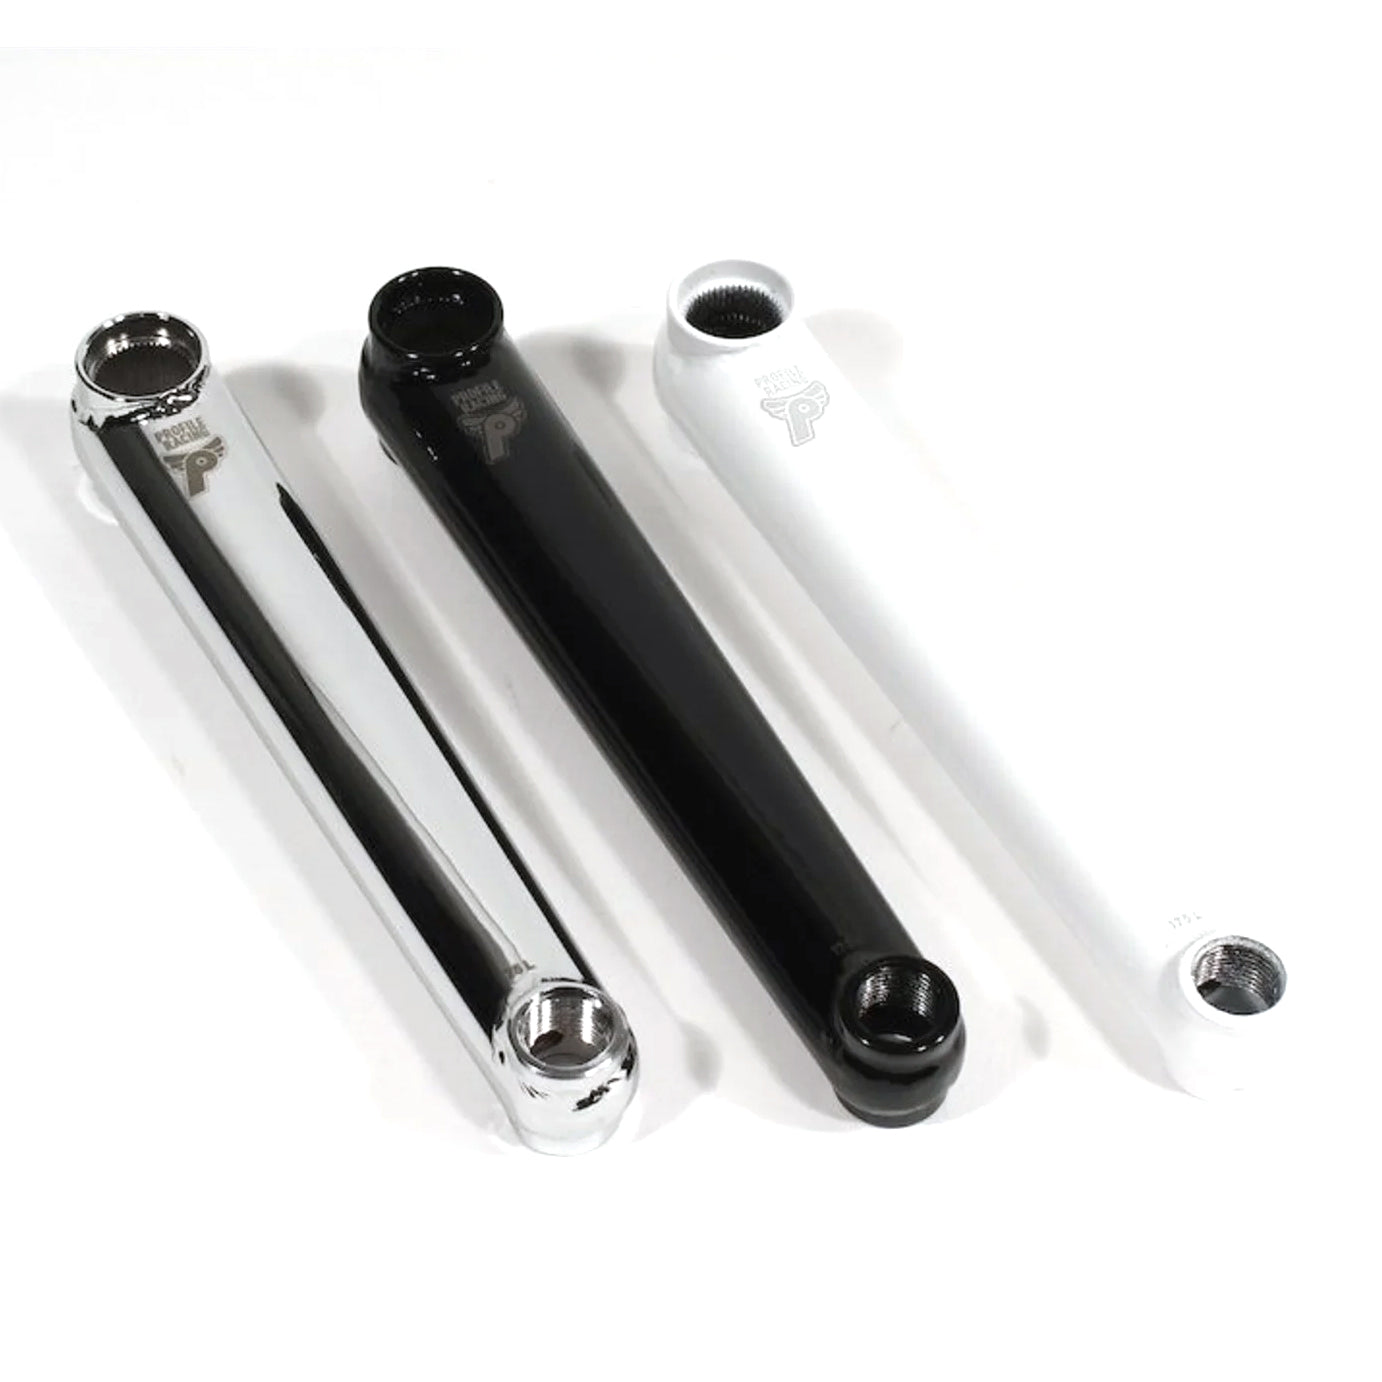 Three Profile Race Cranks in varying sizes and colors, black and white, with a 48 spline spindle, arranged diagonally on a plain background.